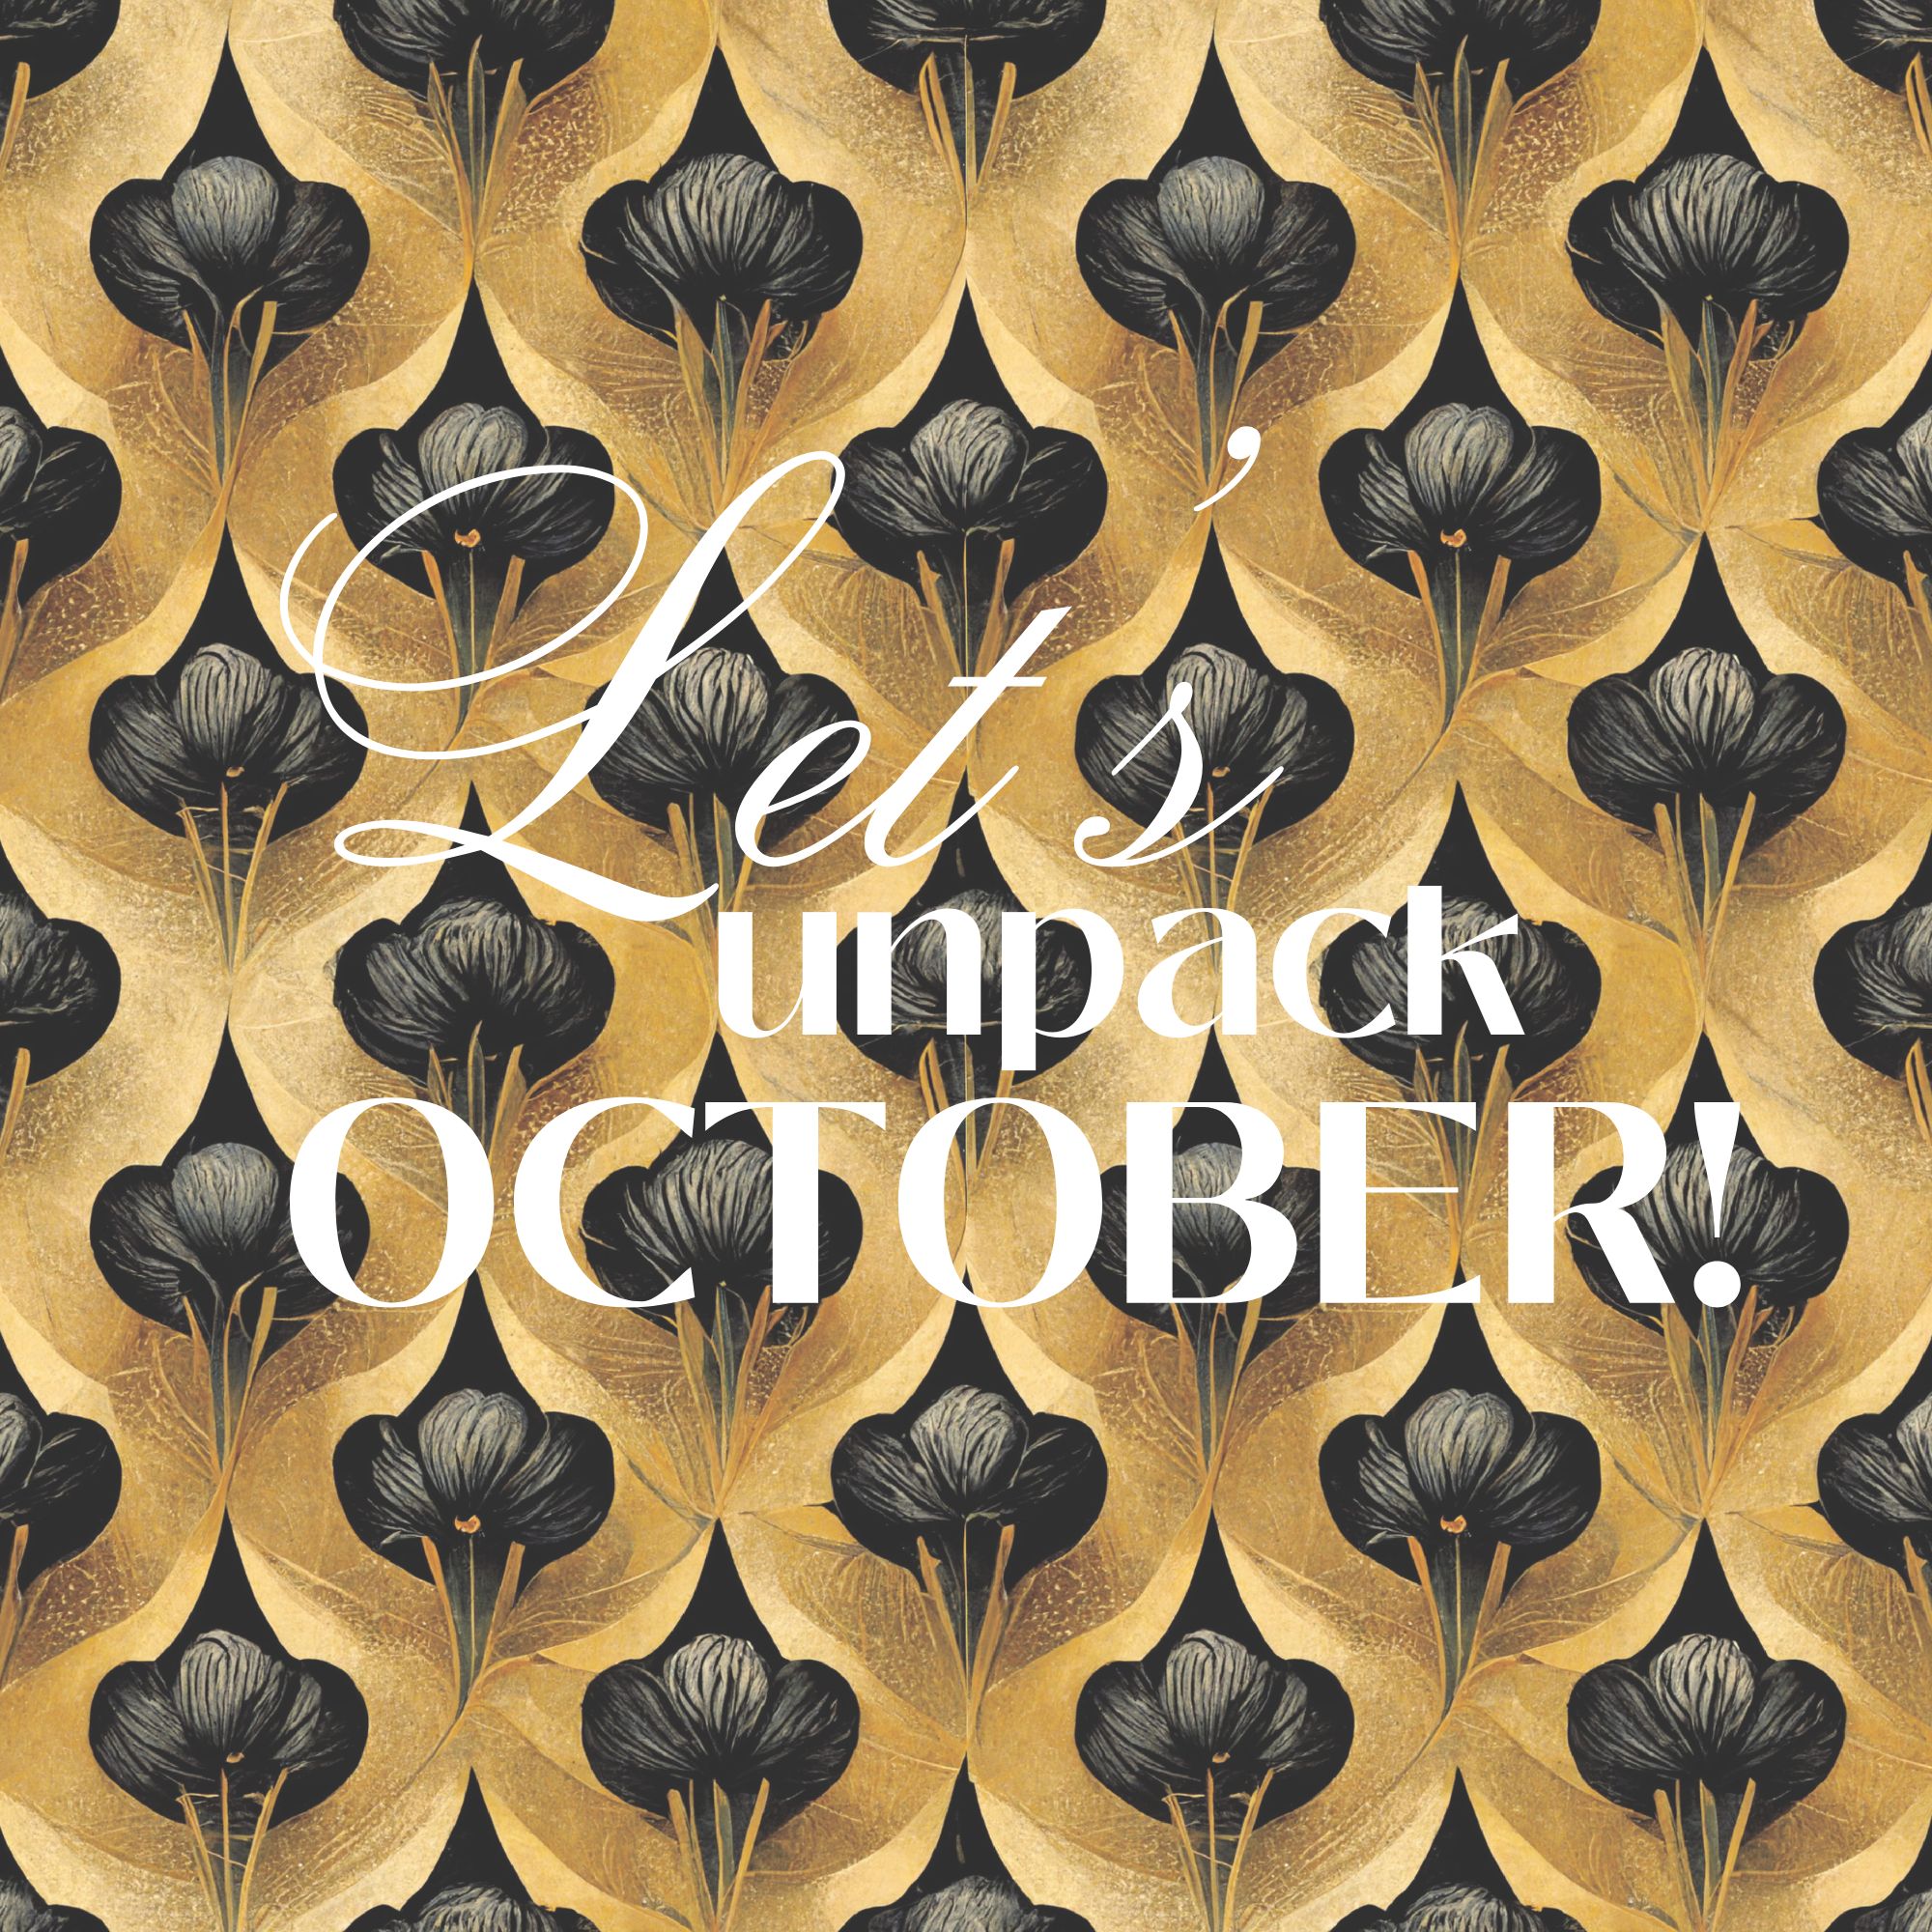 It’s Time to Unpack The Month of October!